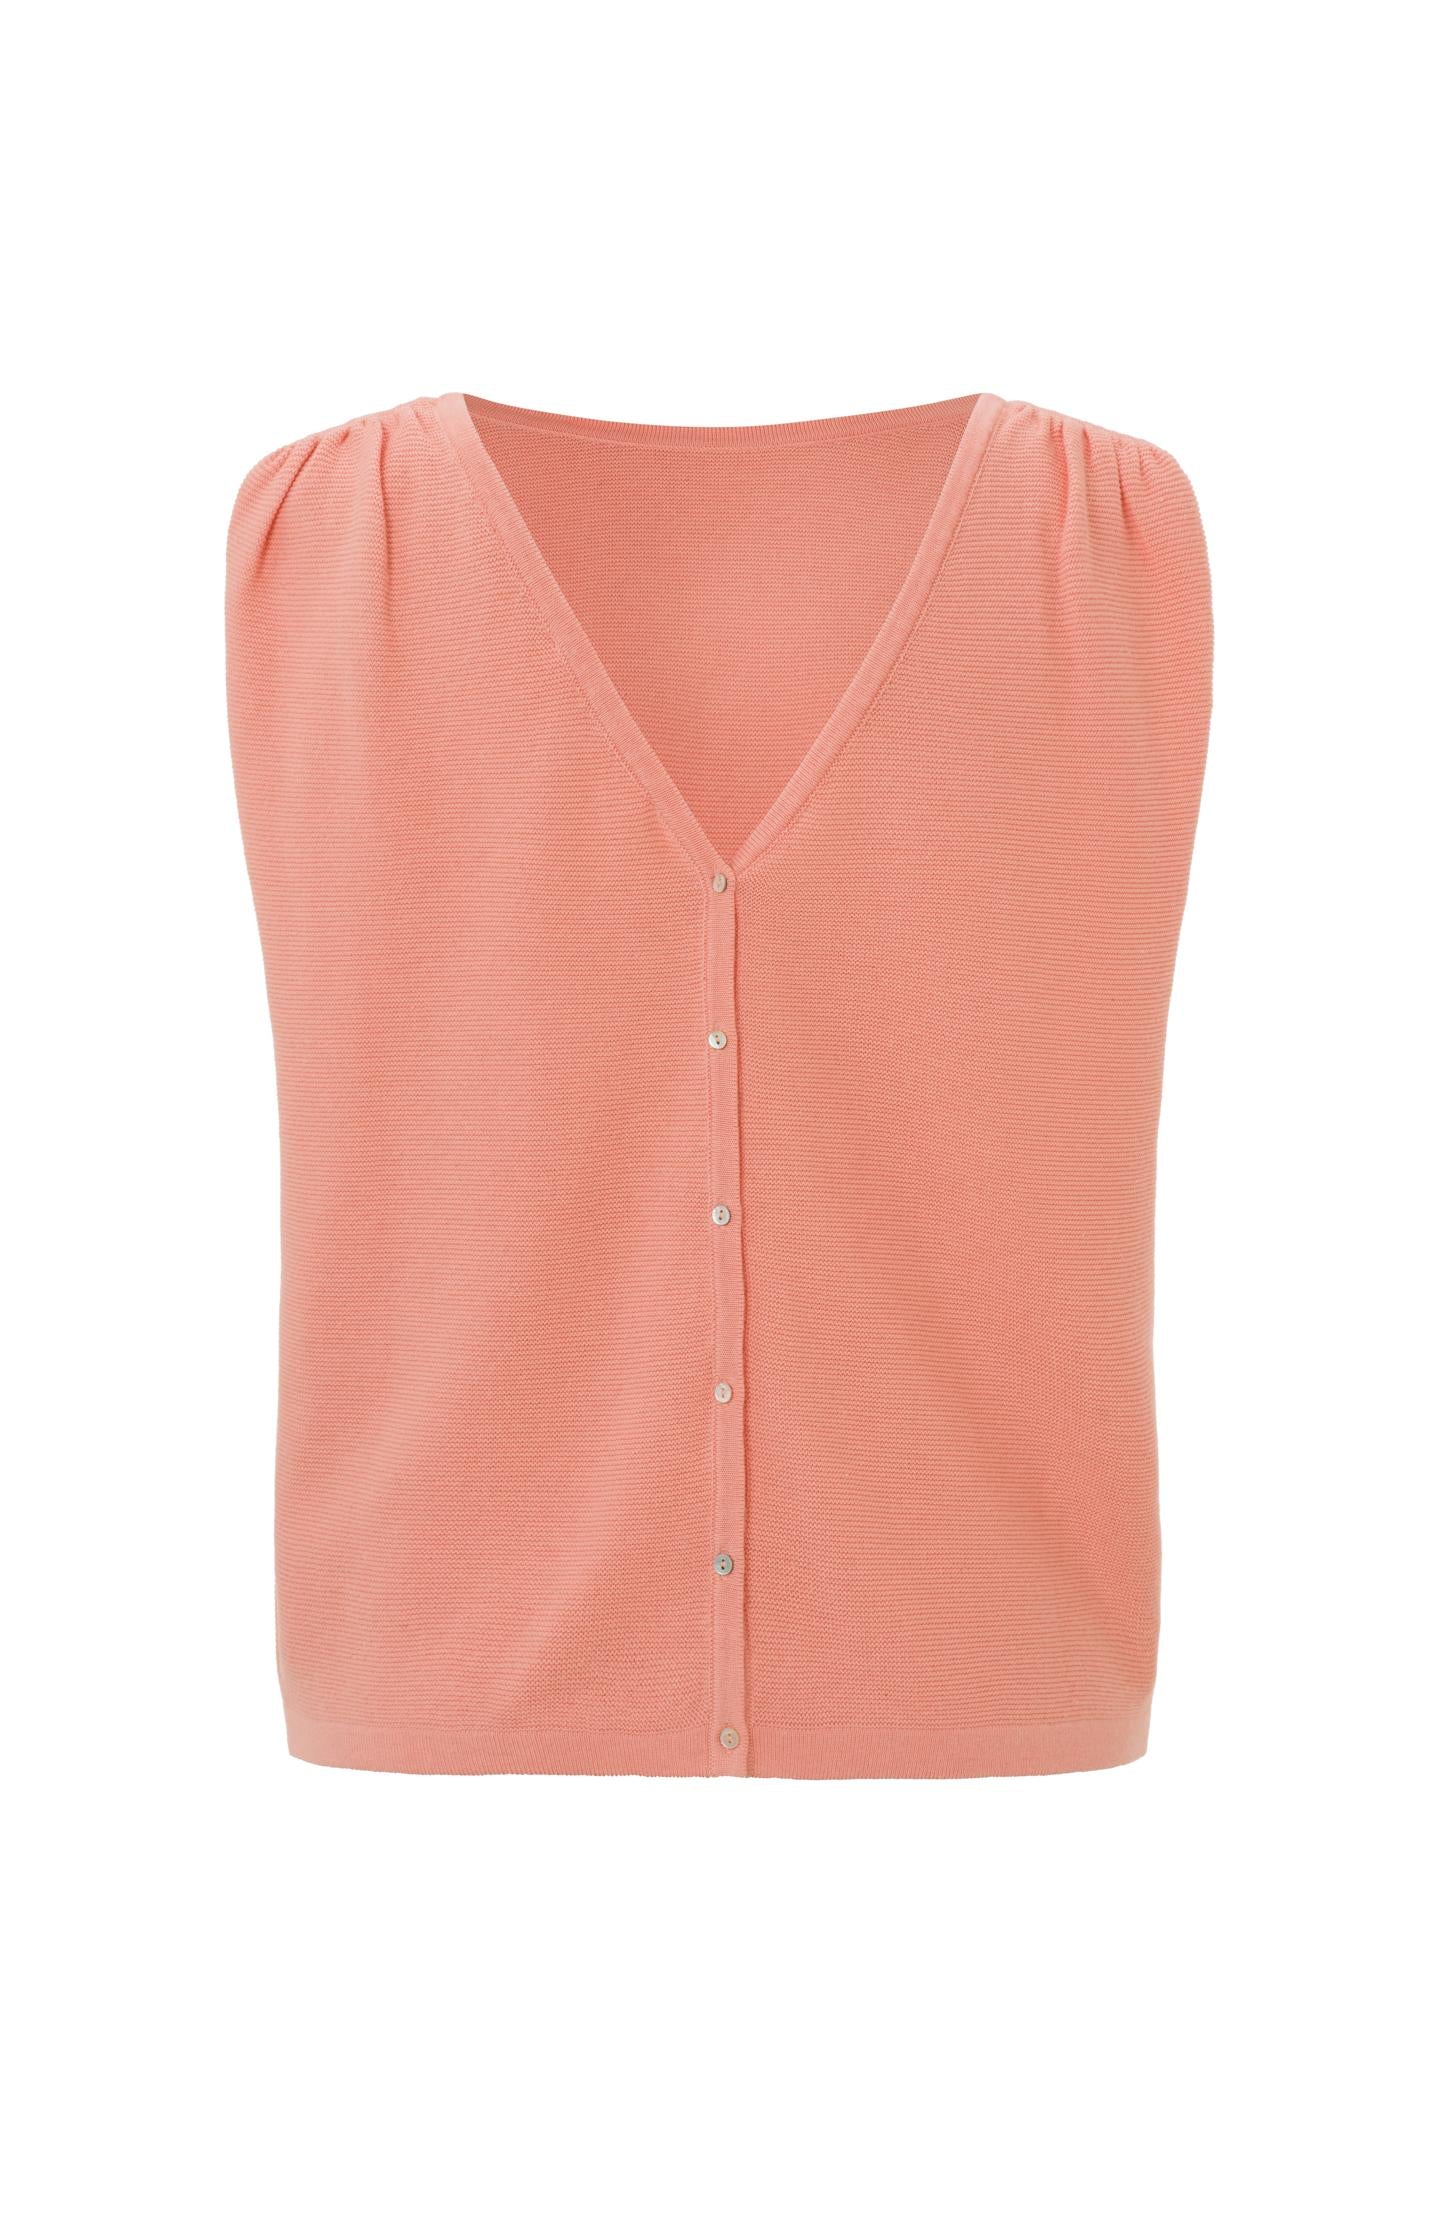 Sleeveless sweater with boat neck and button on back